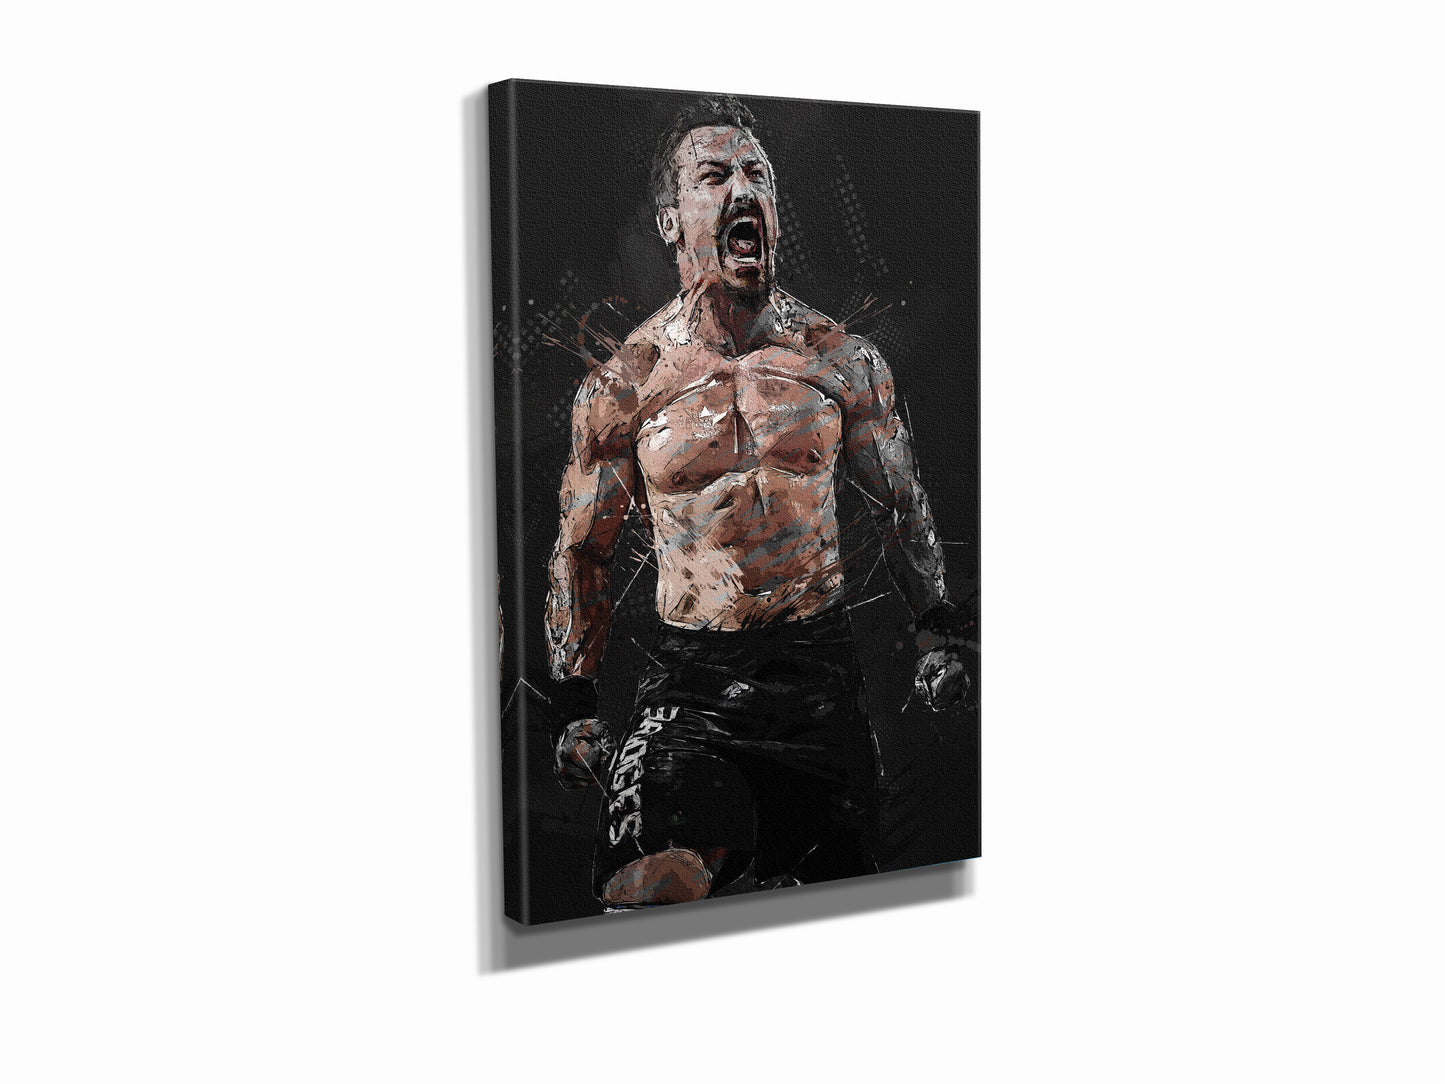 Josh Bridges Poster CrossFit athlete Hand Made Posters Canvas Print Wall Art Man Cave Gift Home Decor